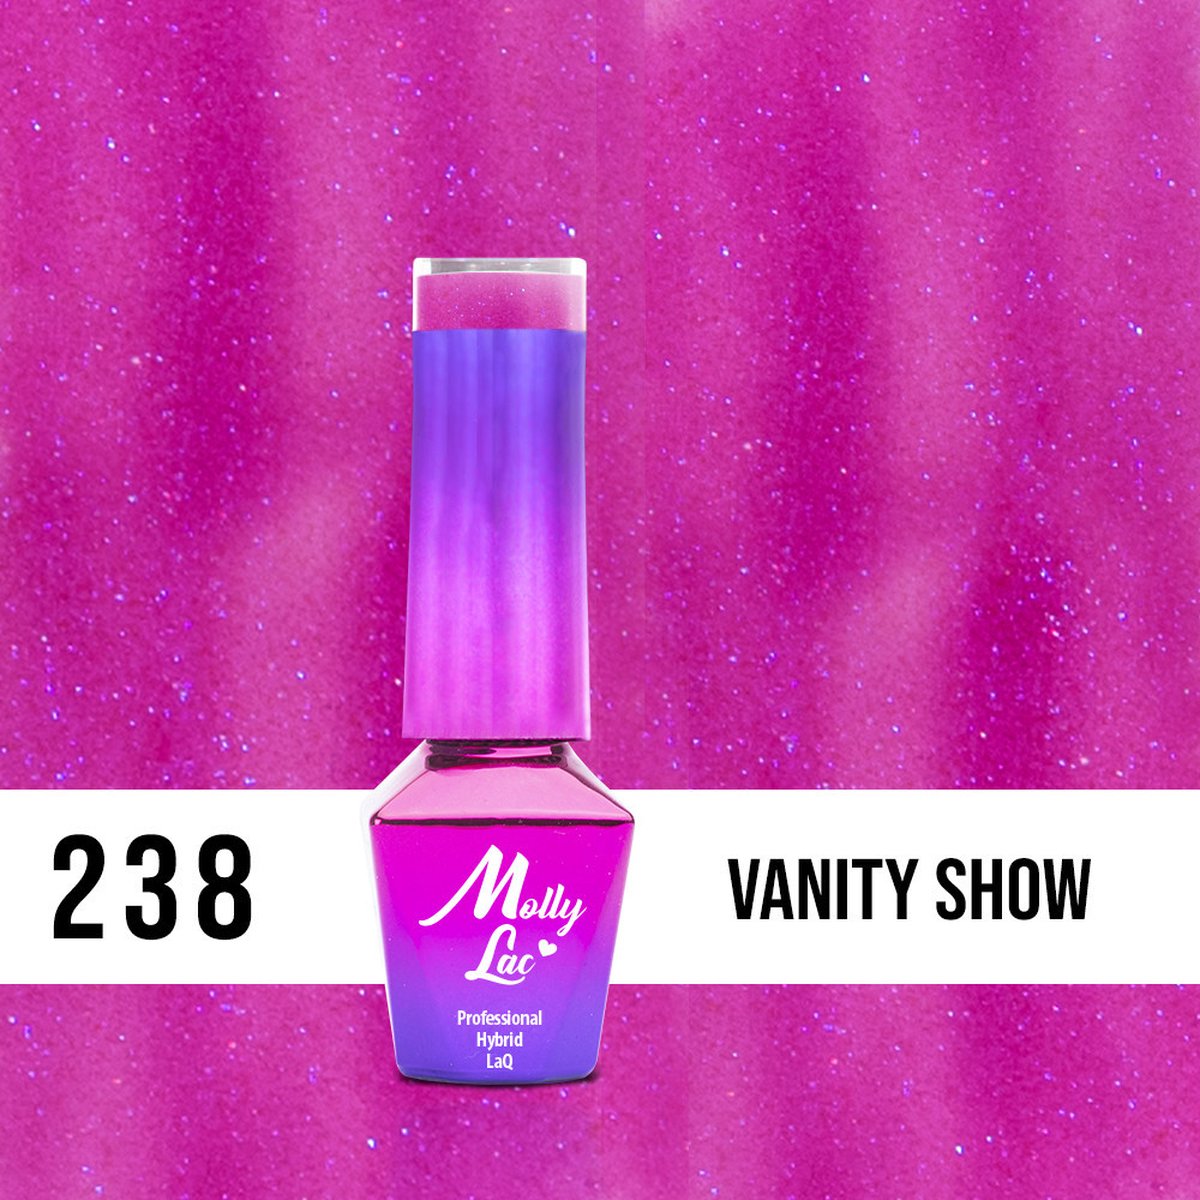 Molly Lac Glowing time - Vanity Show nr 238 5ml